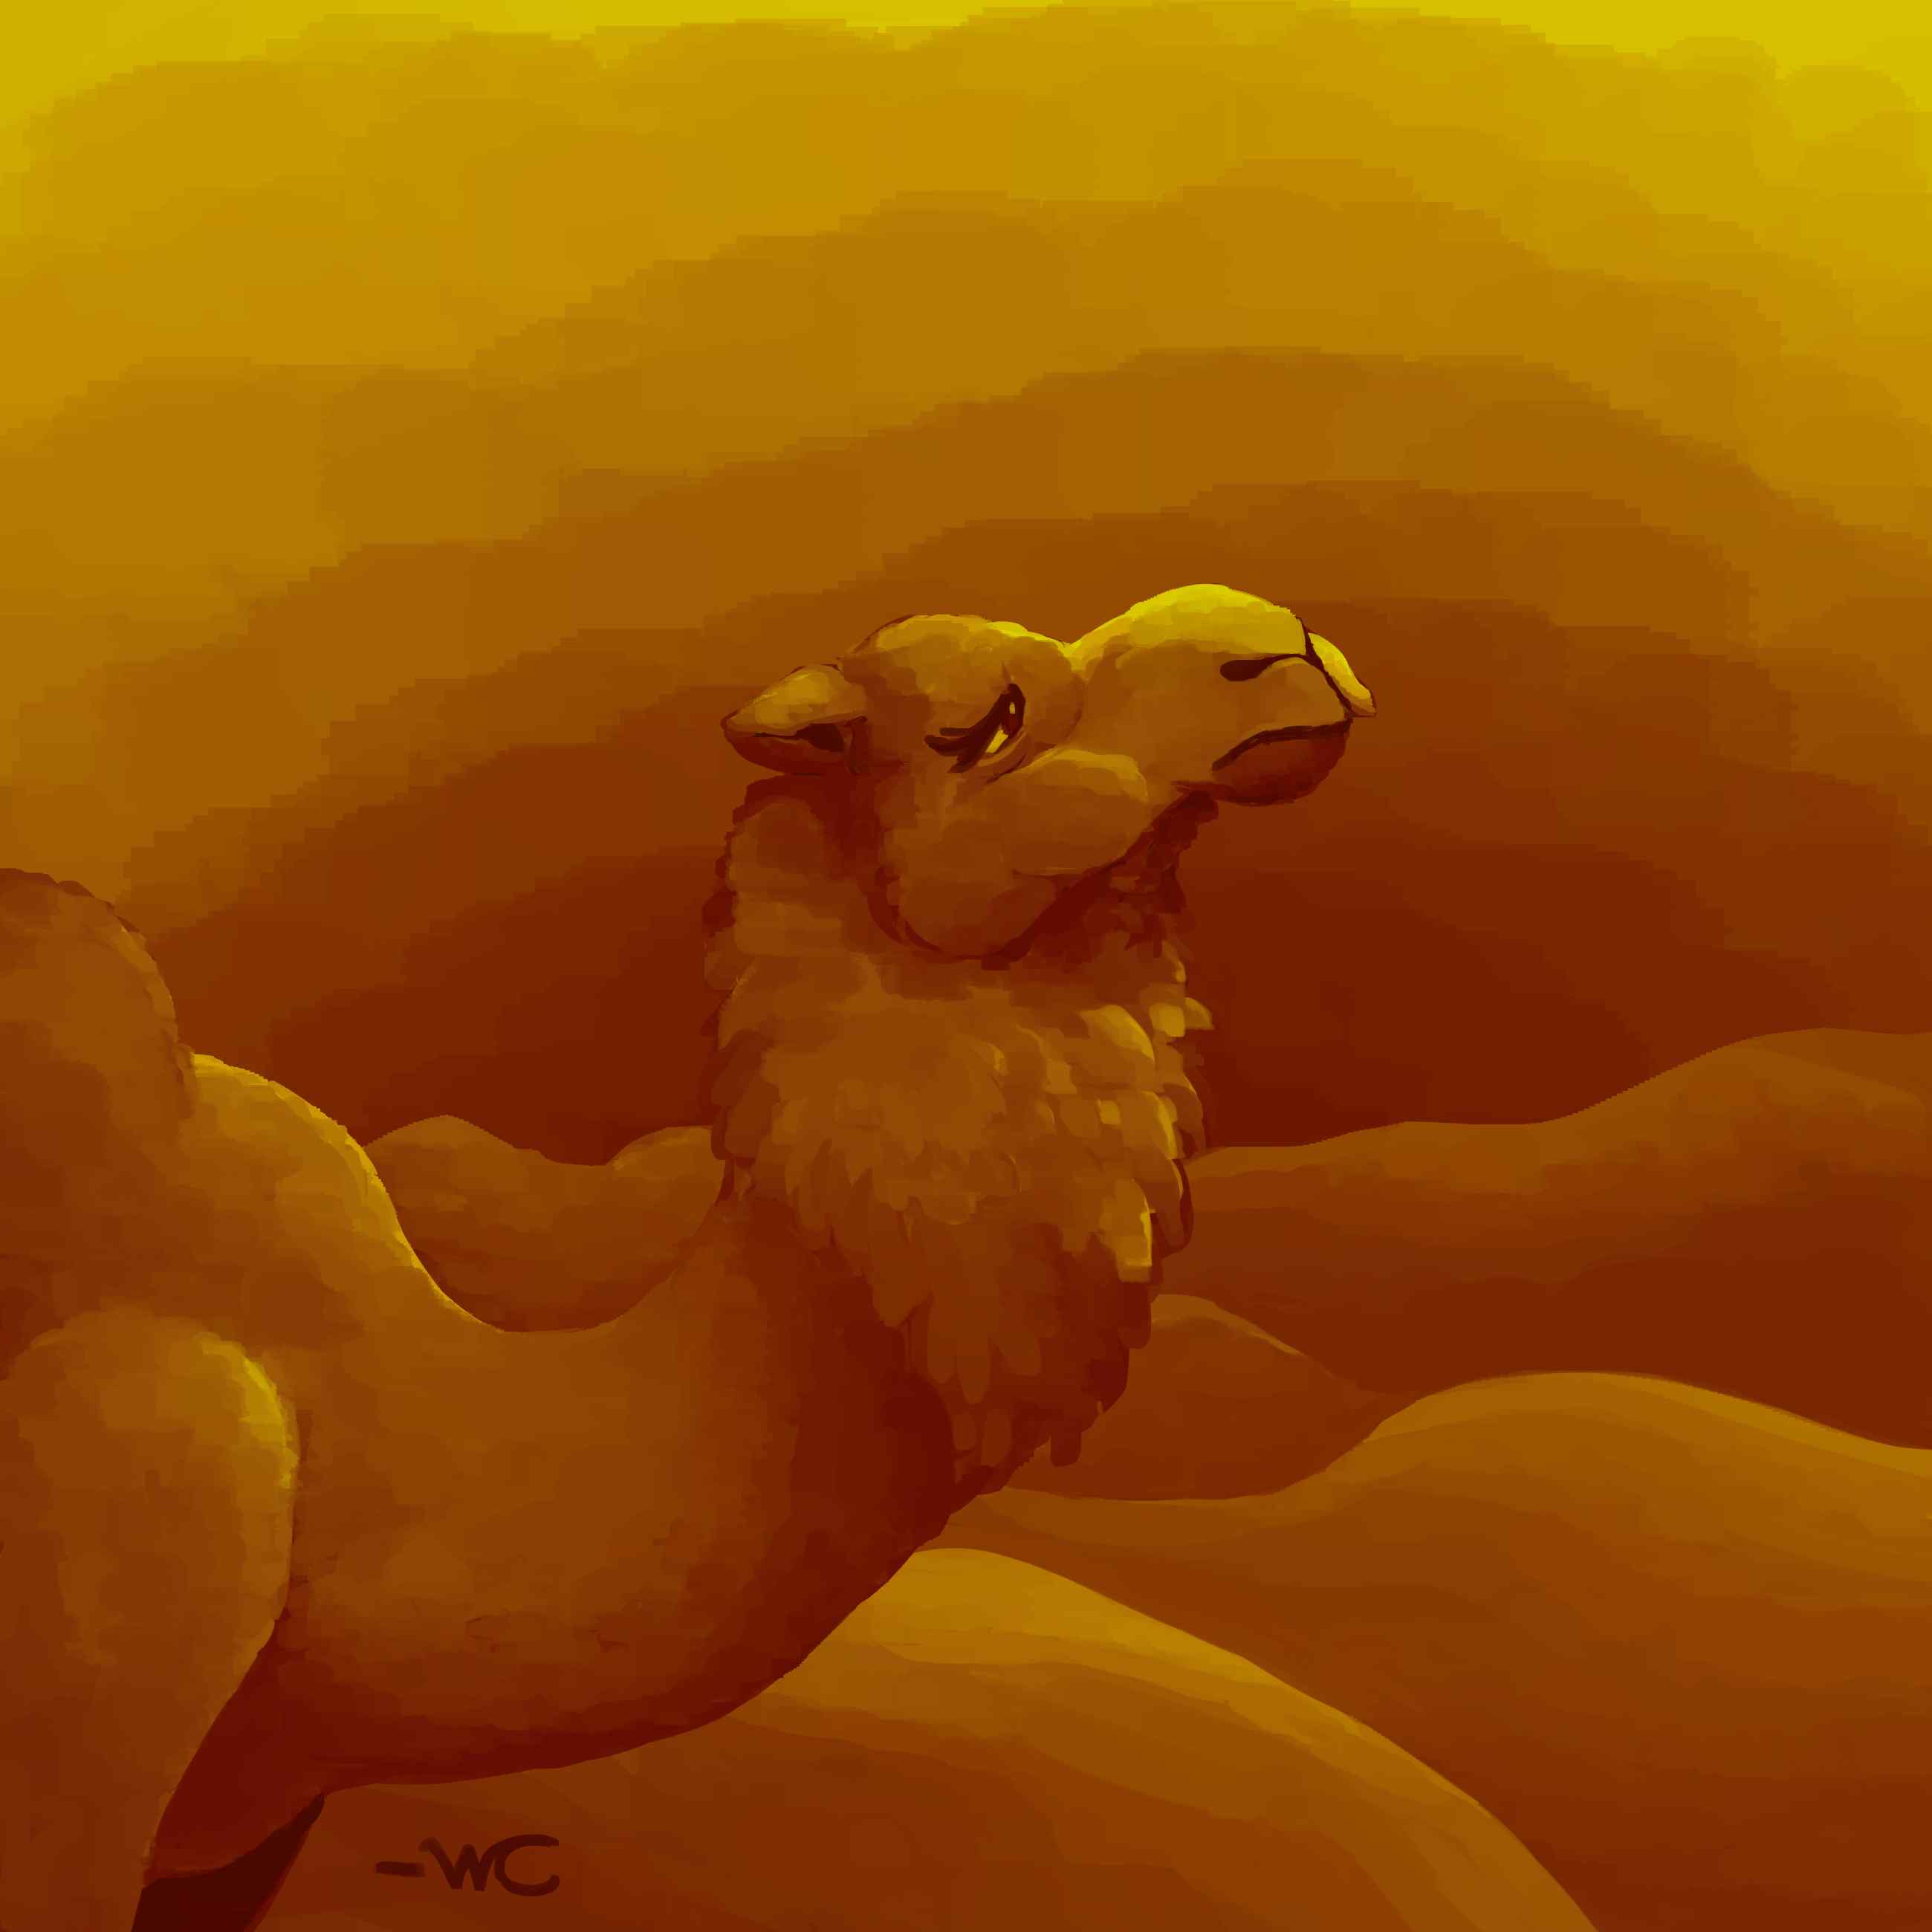 A digital painting of a dromedary camel looking longingly to the sky. It is done entirely with a yellow, orange, and red palette. The only parts of the camel visible are its head, neck, shoulders, and front of its body. It's a side profile.